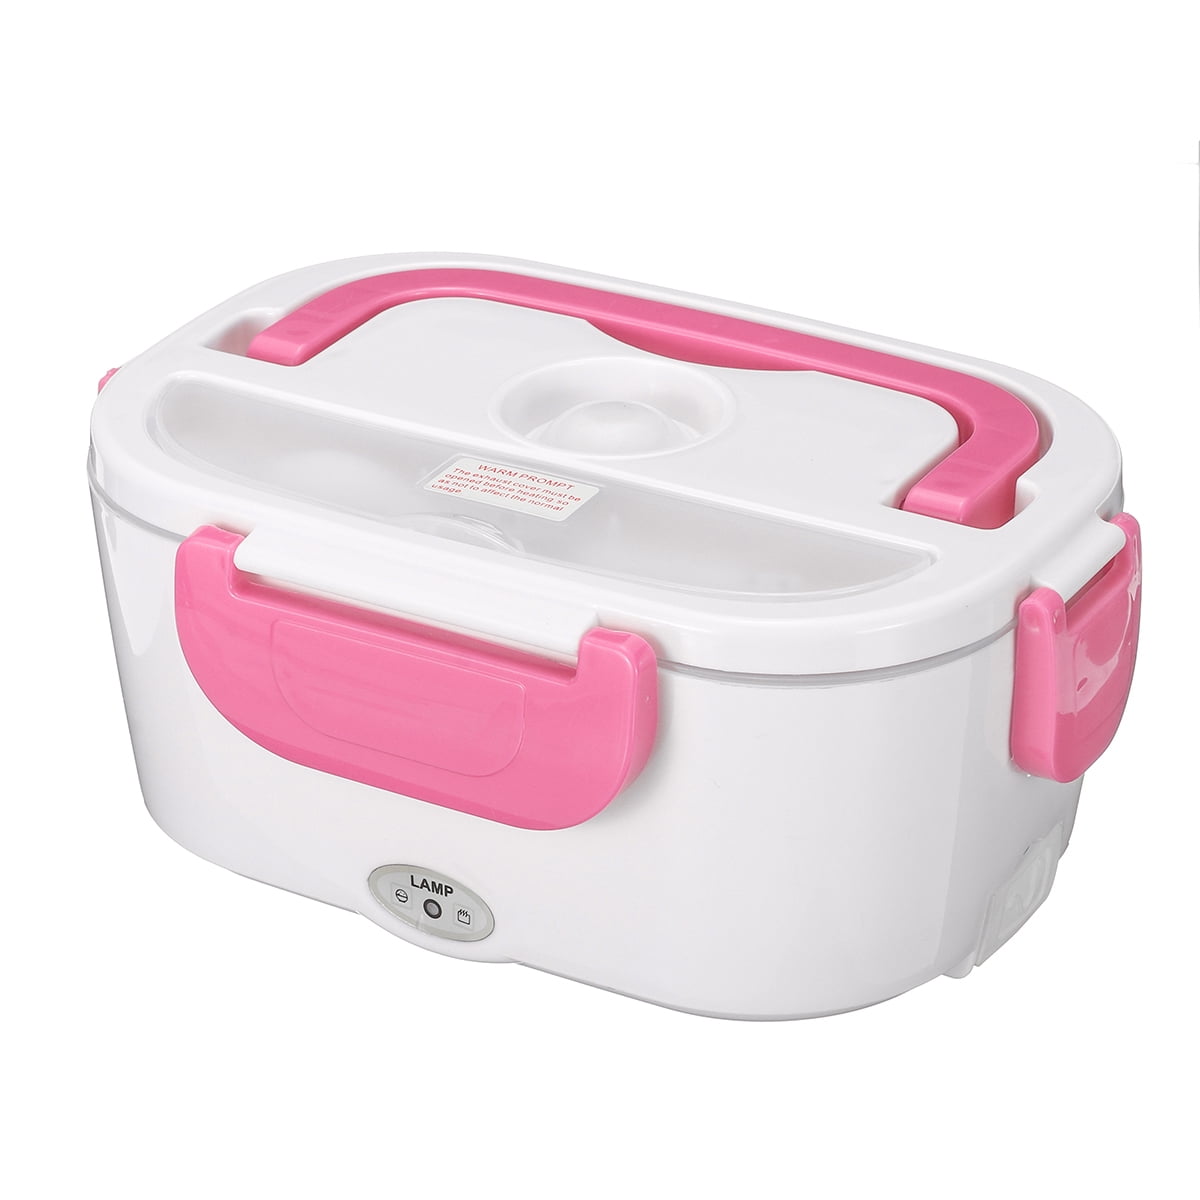 220V 110V 12V EU US Car Plug Electric Lunch Box Stainless Steel Picnic  Portable Heating Lunchbox Food Heated Warmer Container - AliExpress